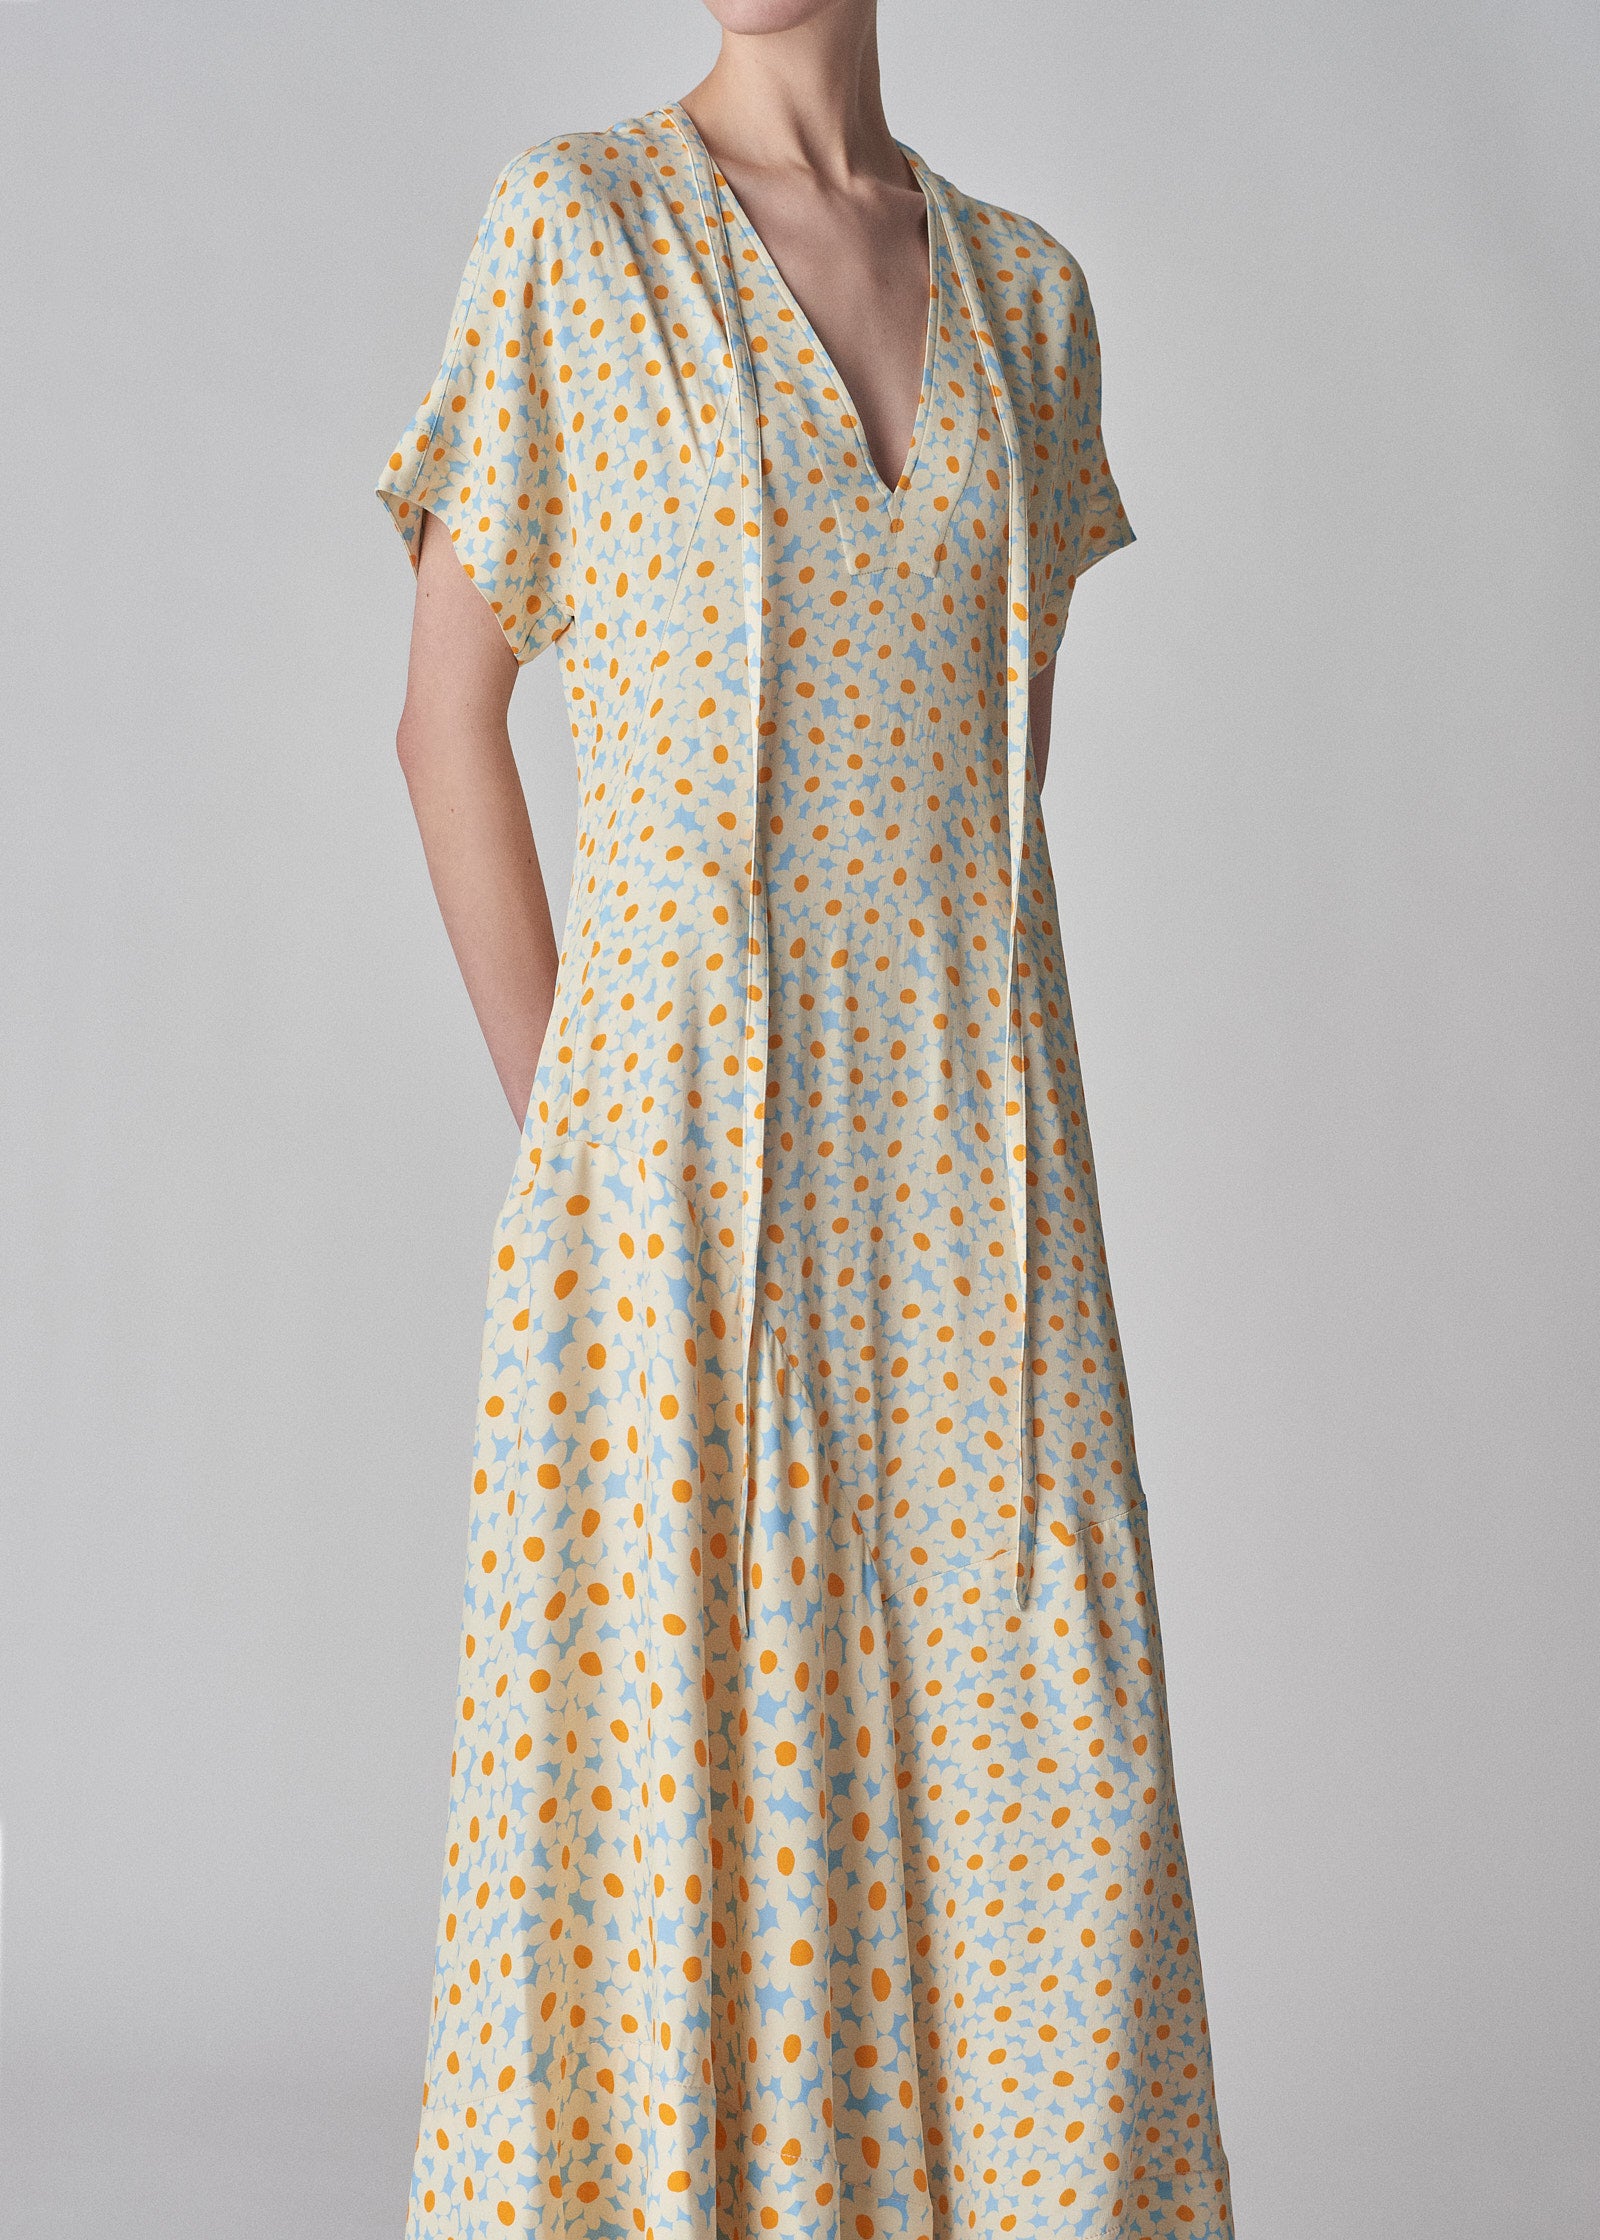 Floral V-neck Dress in Viscose Habotai - Ivory Multi - CO Collections